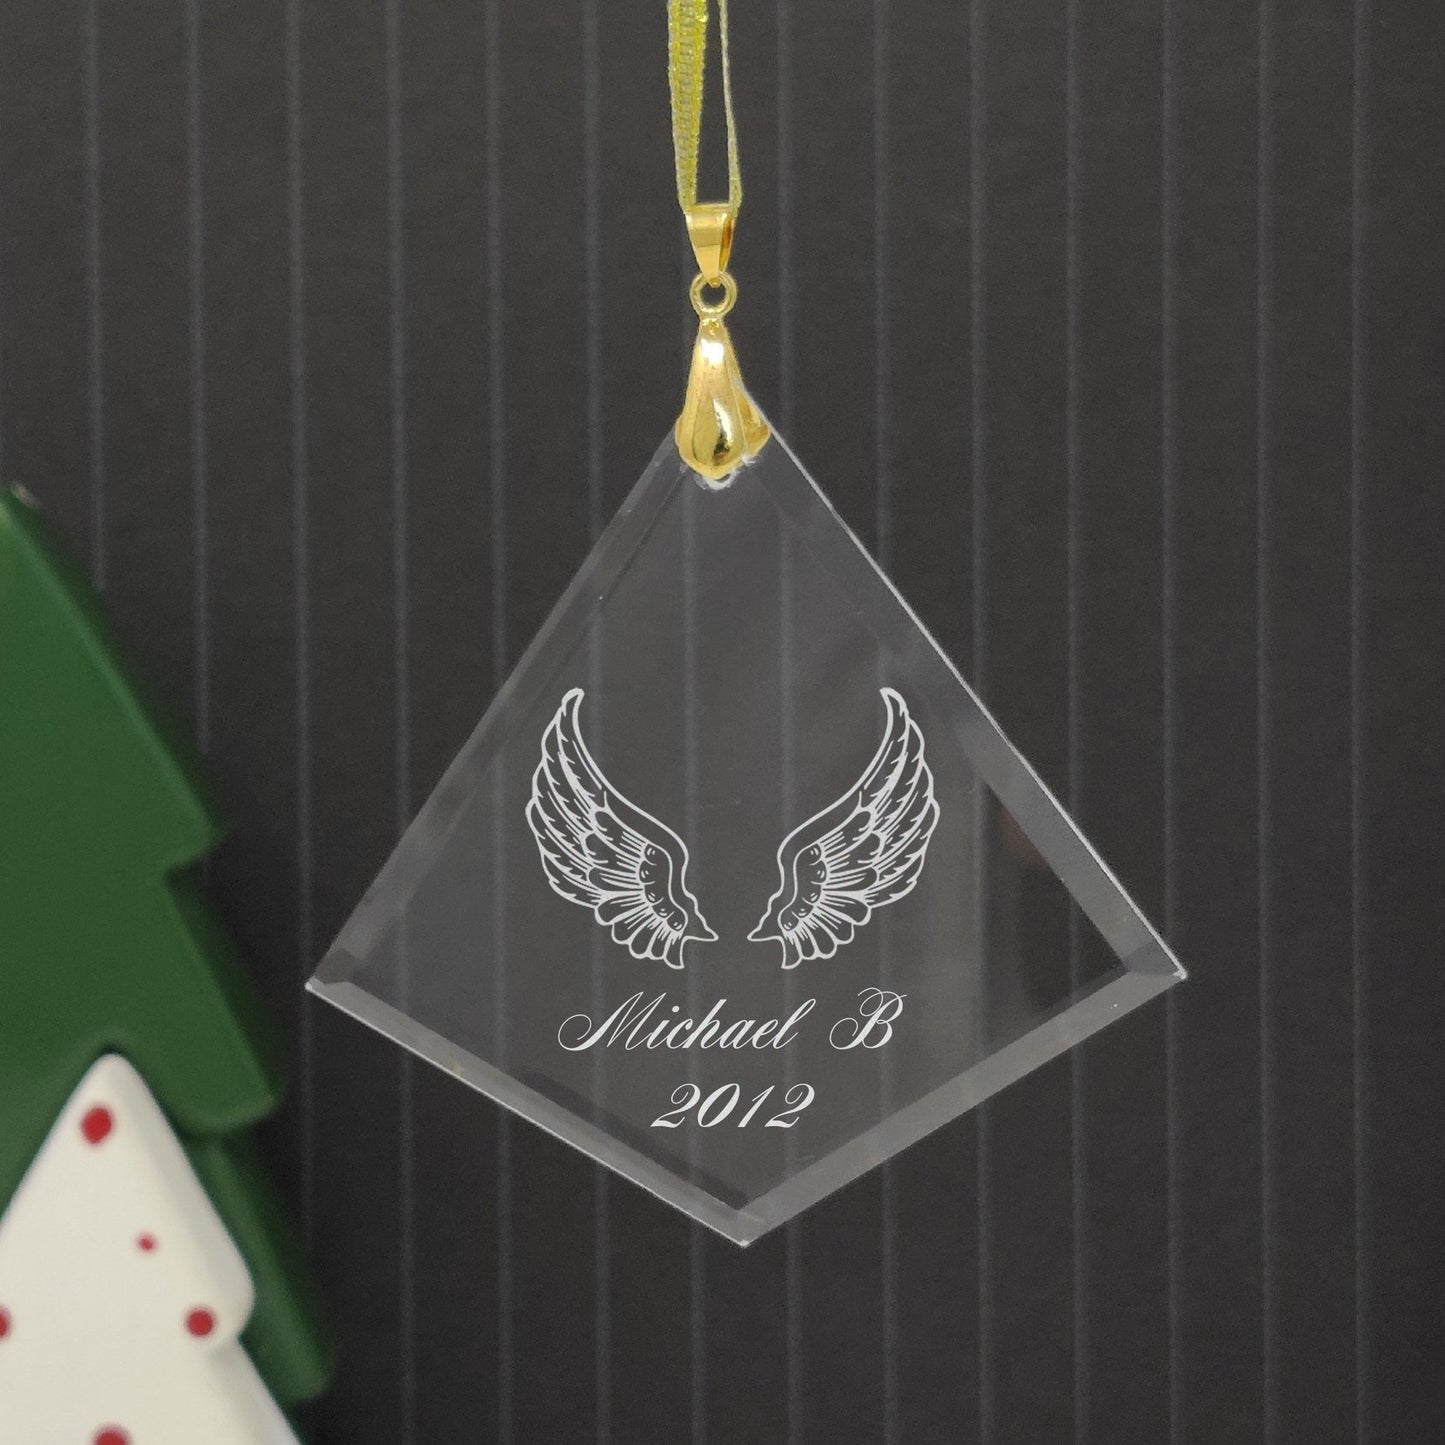 LaserGram Christmas Ornament, Chess King, Personalized Engraving Included (Diamond Shape)